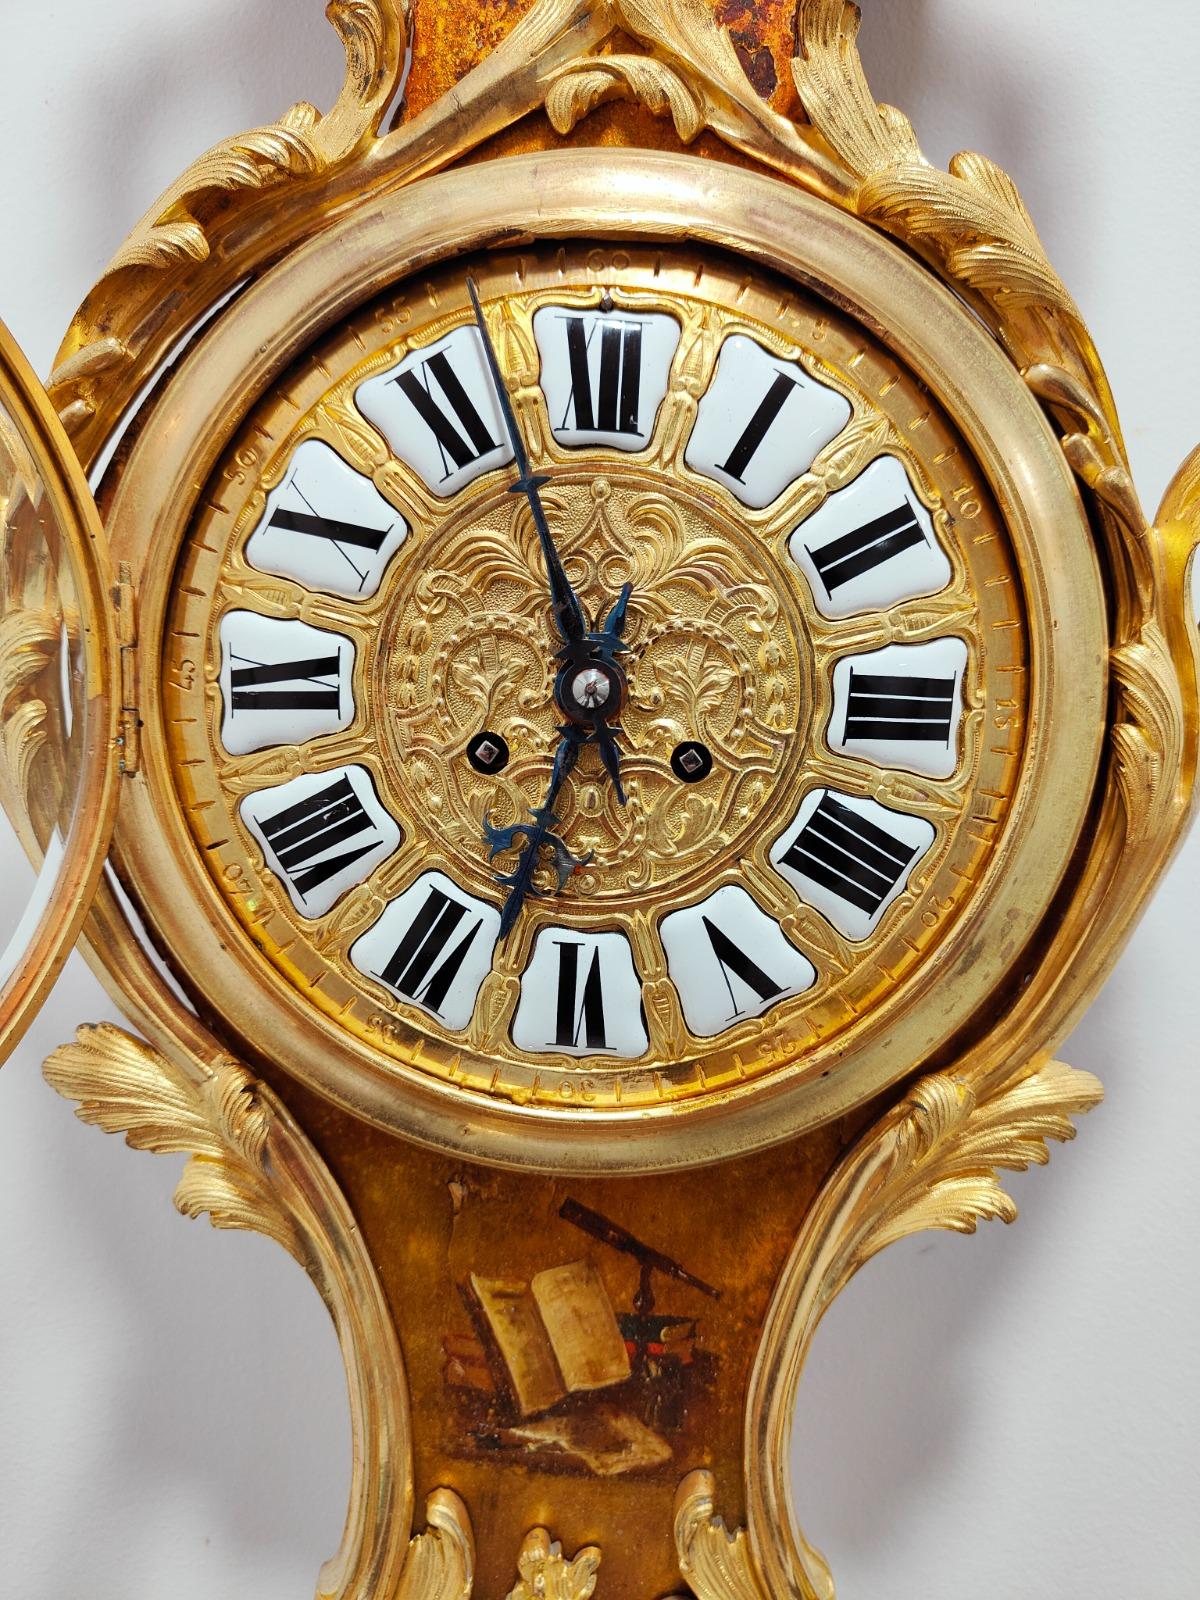 Louis XV Style Vernis martin cartel clock and thermometer, circa 1740.
A very fine and palatial of French 18 century Louis XV style vernis martin and gilt bronze-mounted cartel clock . Surmounted with gilt bronze ornaments depicting scrolls,